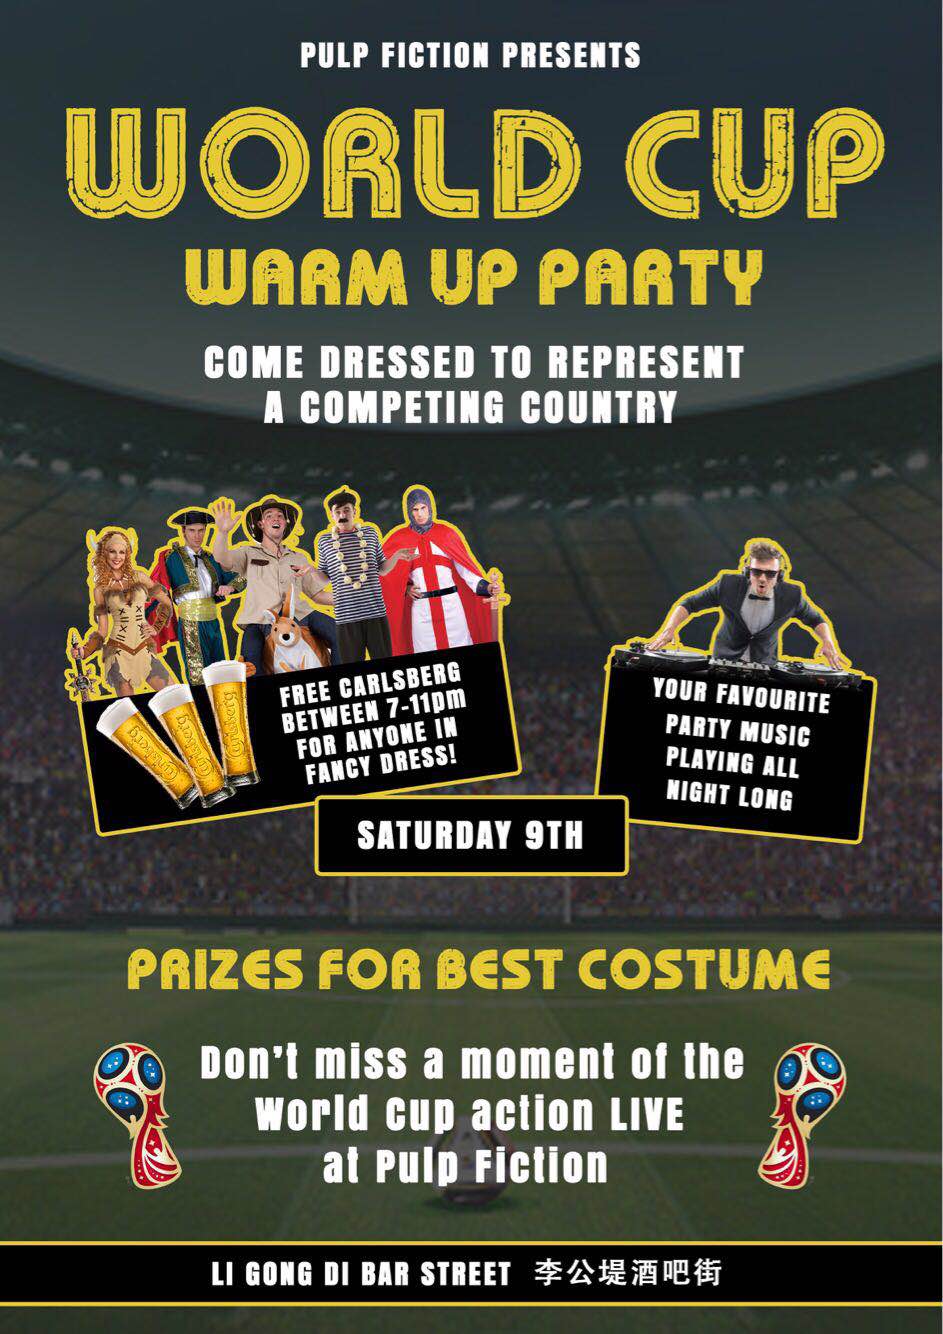 World Cup Warm Up Party